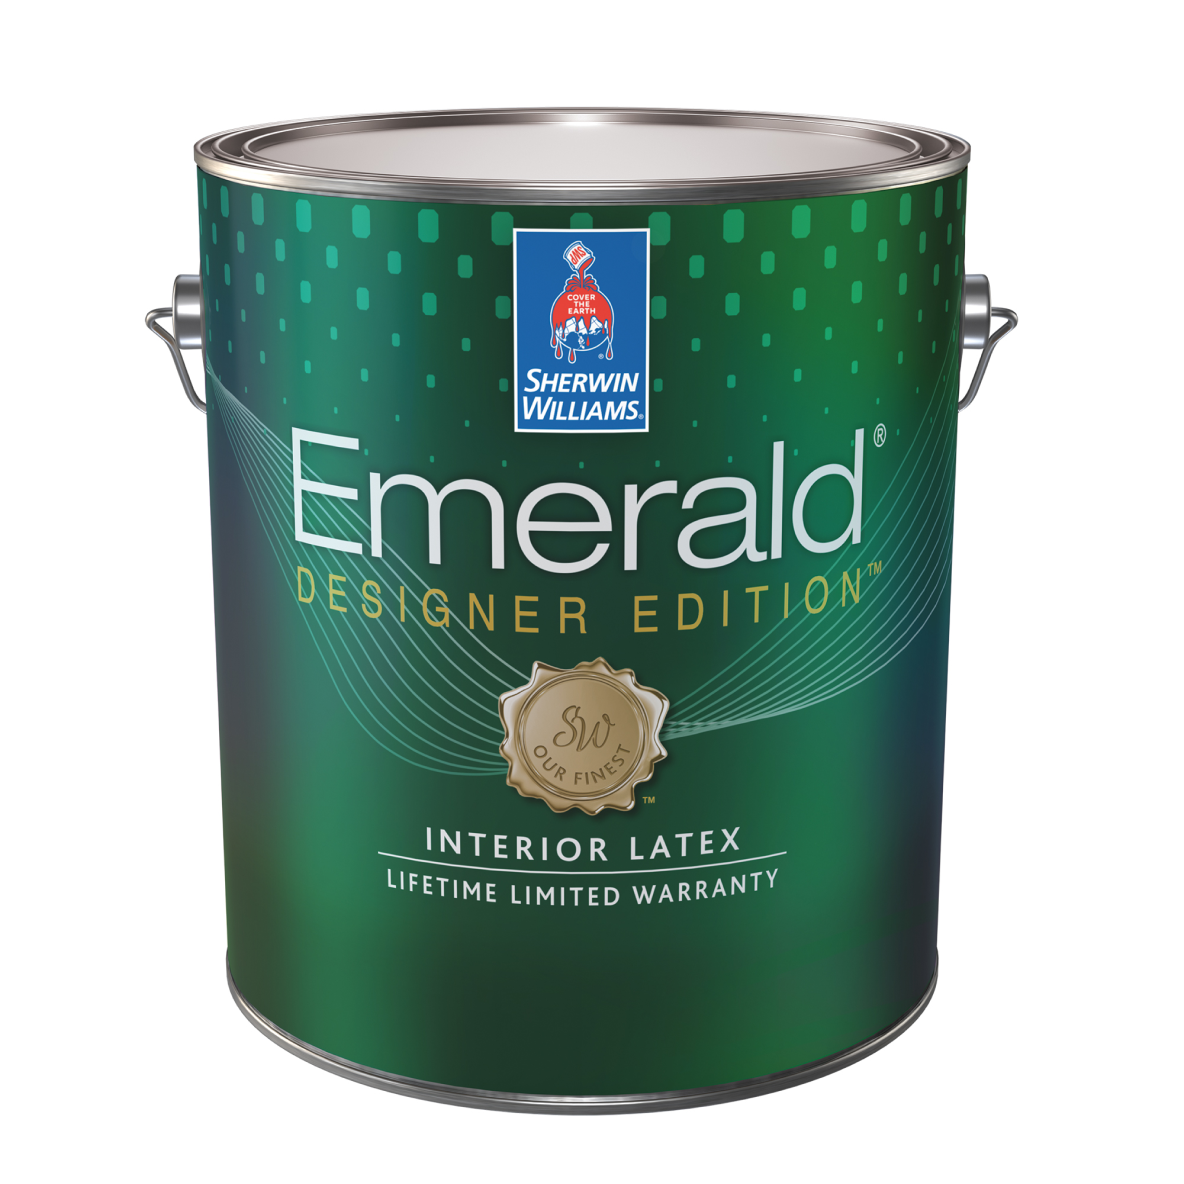 A green labeled paint can for Sherwin-Williams Emerald Designer Edition Collection.